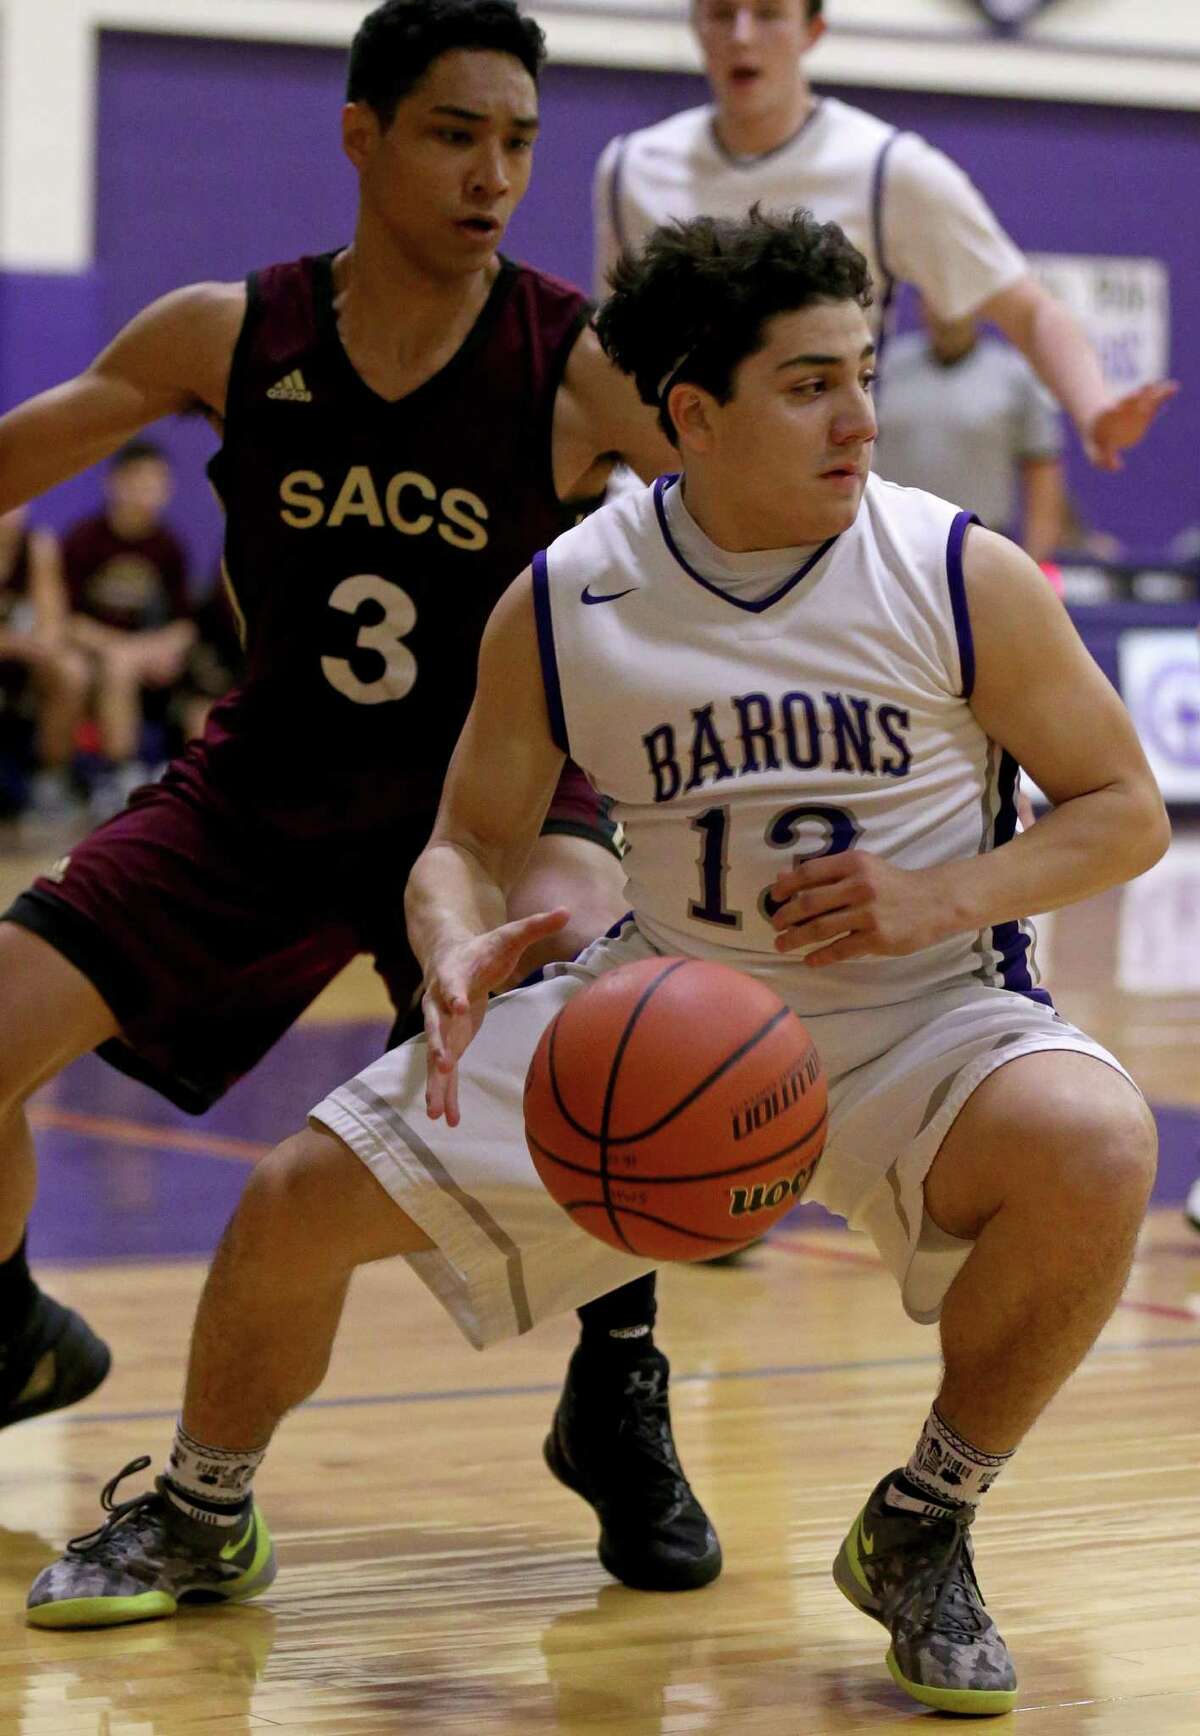 Jesse Llamas of Saint Mary's Hall looks for room around San Antonio Christian's Alex Green during first half action Friday Feb. 3, 2017 at Saint Mary's Hall.